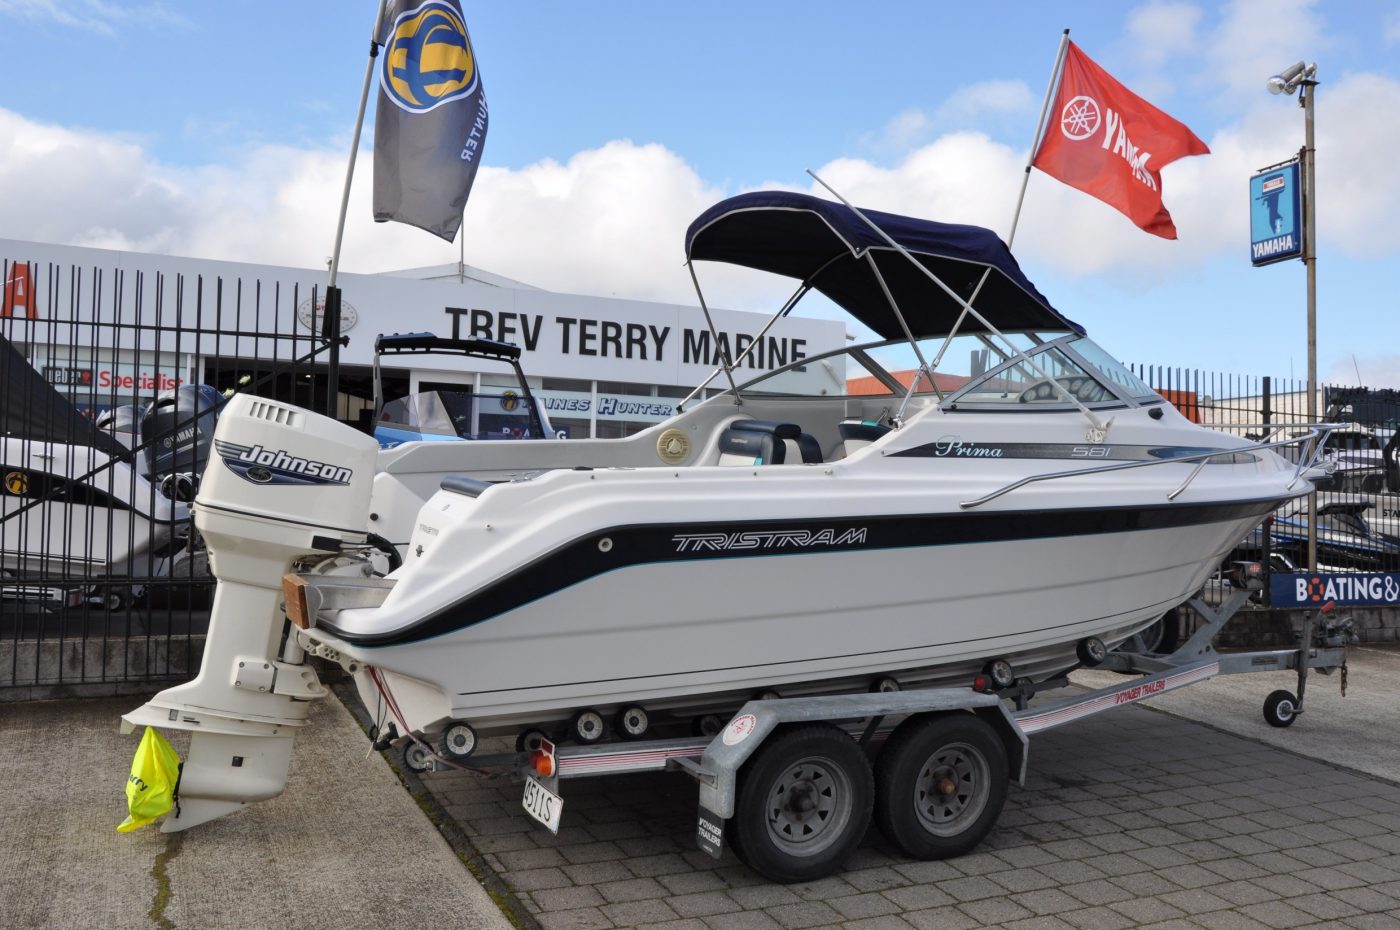 Trev Terry Marine  Taupo Official Website